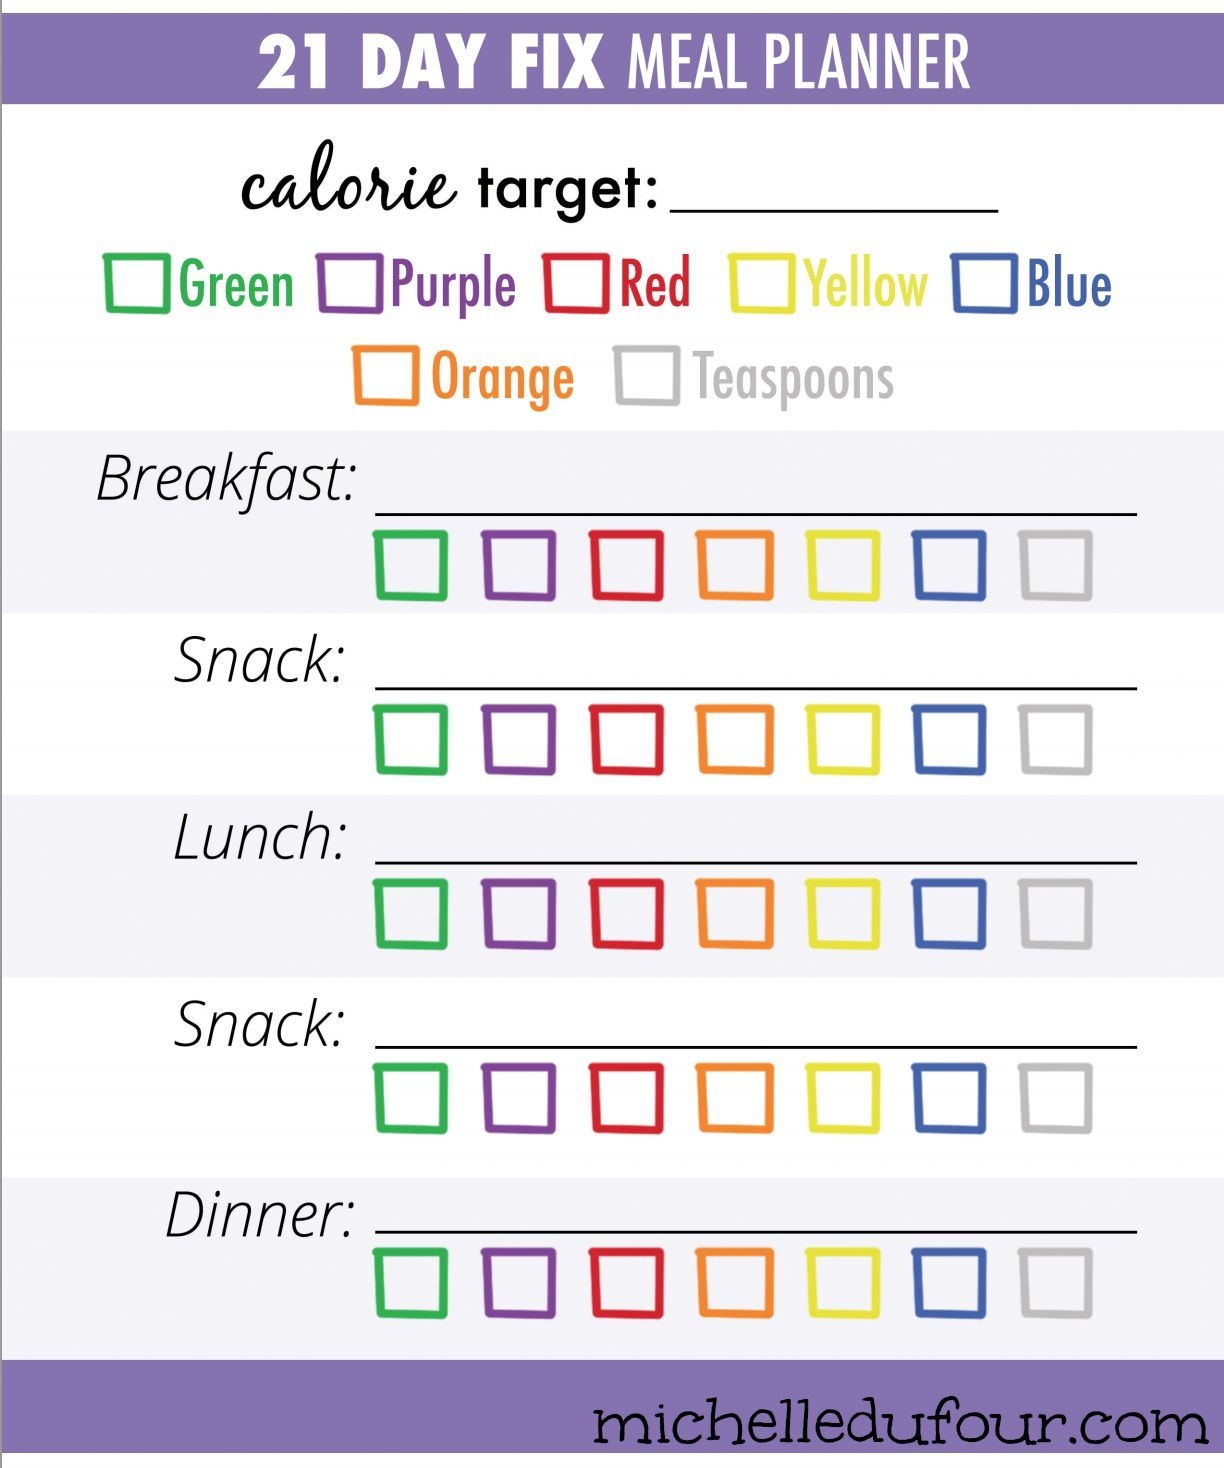 Here Is A BLANK Meal Plan Template You Can Use 21 Day Fix Meal Plan 21 Day Fix Meals 21 Day Fix Plan